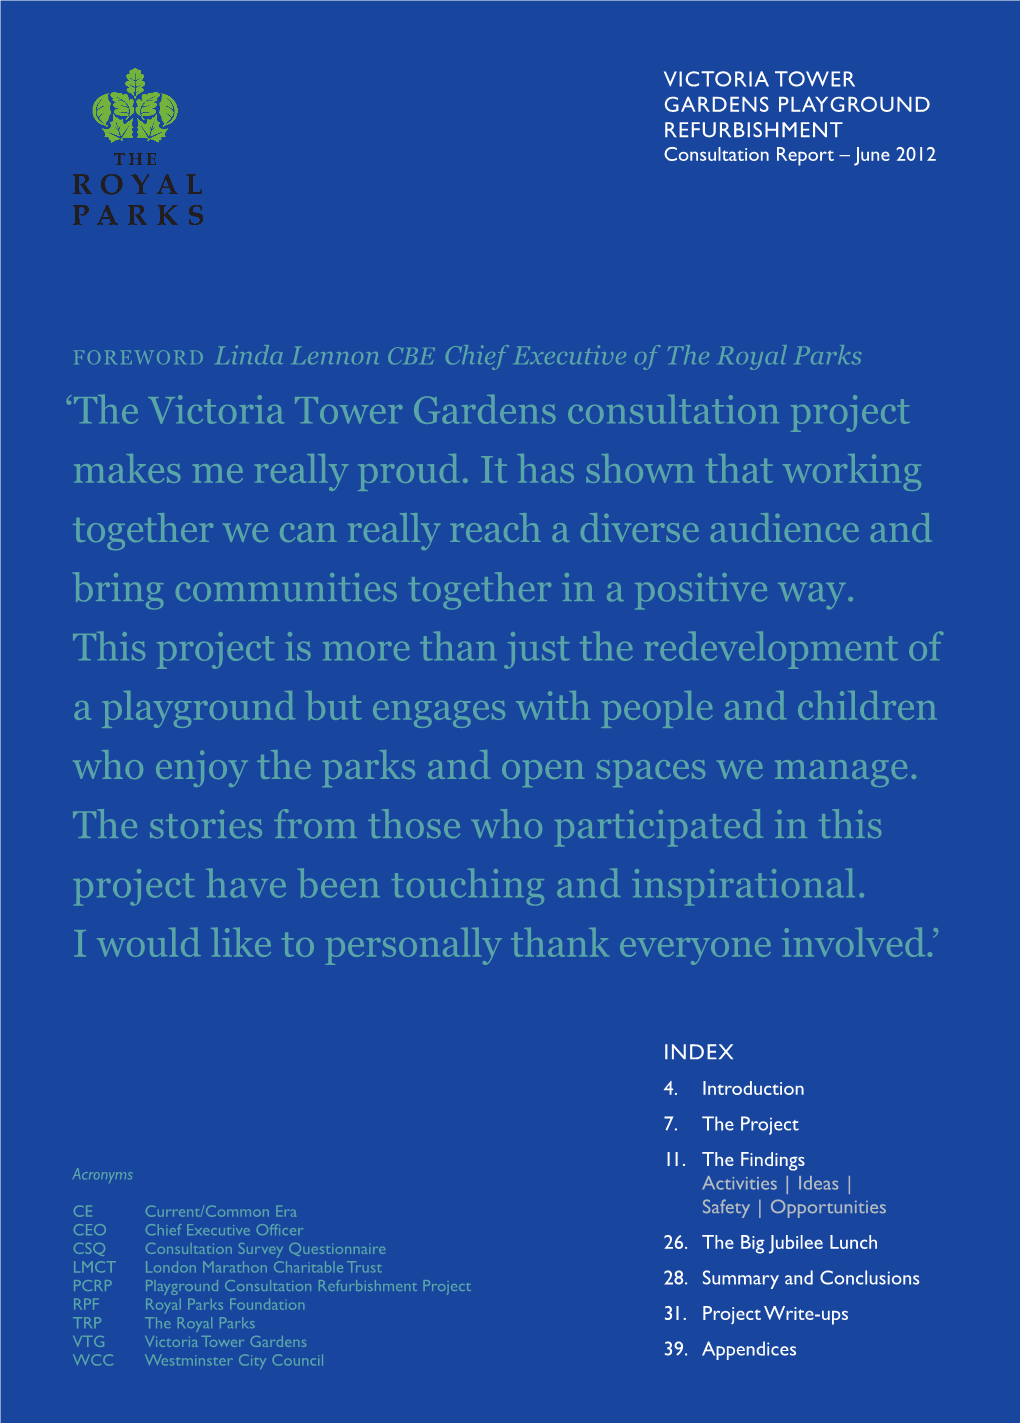 The Royal Parks ‘The Victoria Tower Gardens Consultation Project Makes Me Really Proud